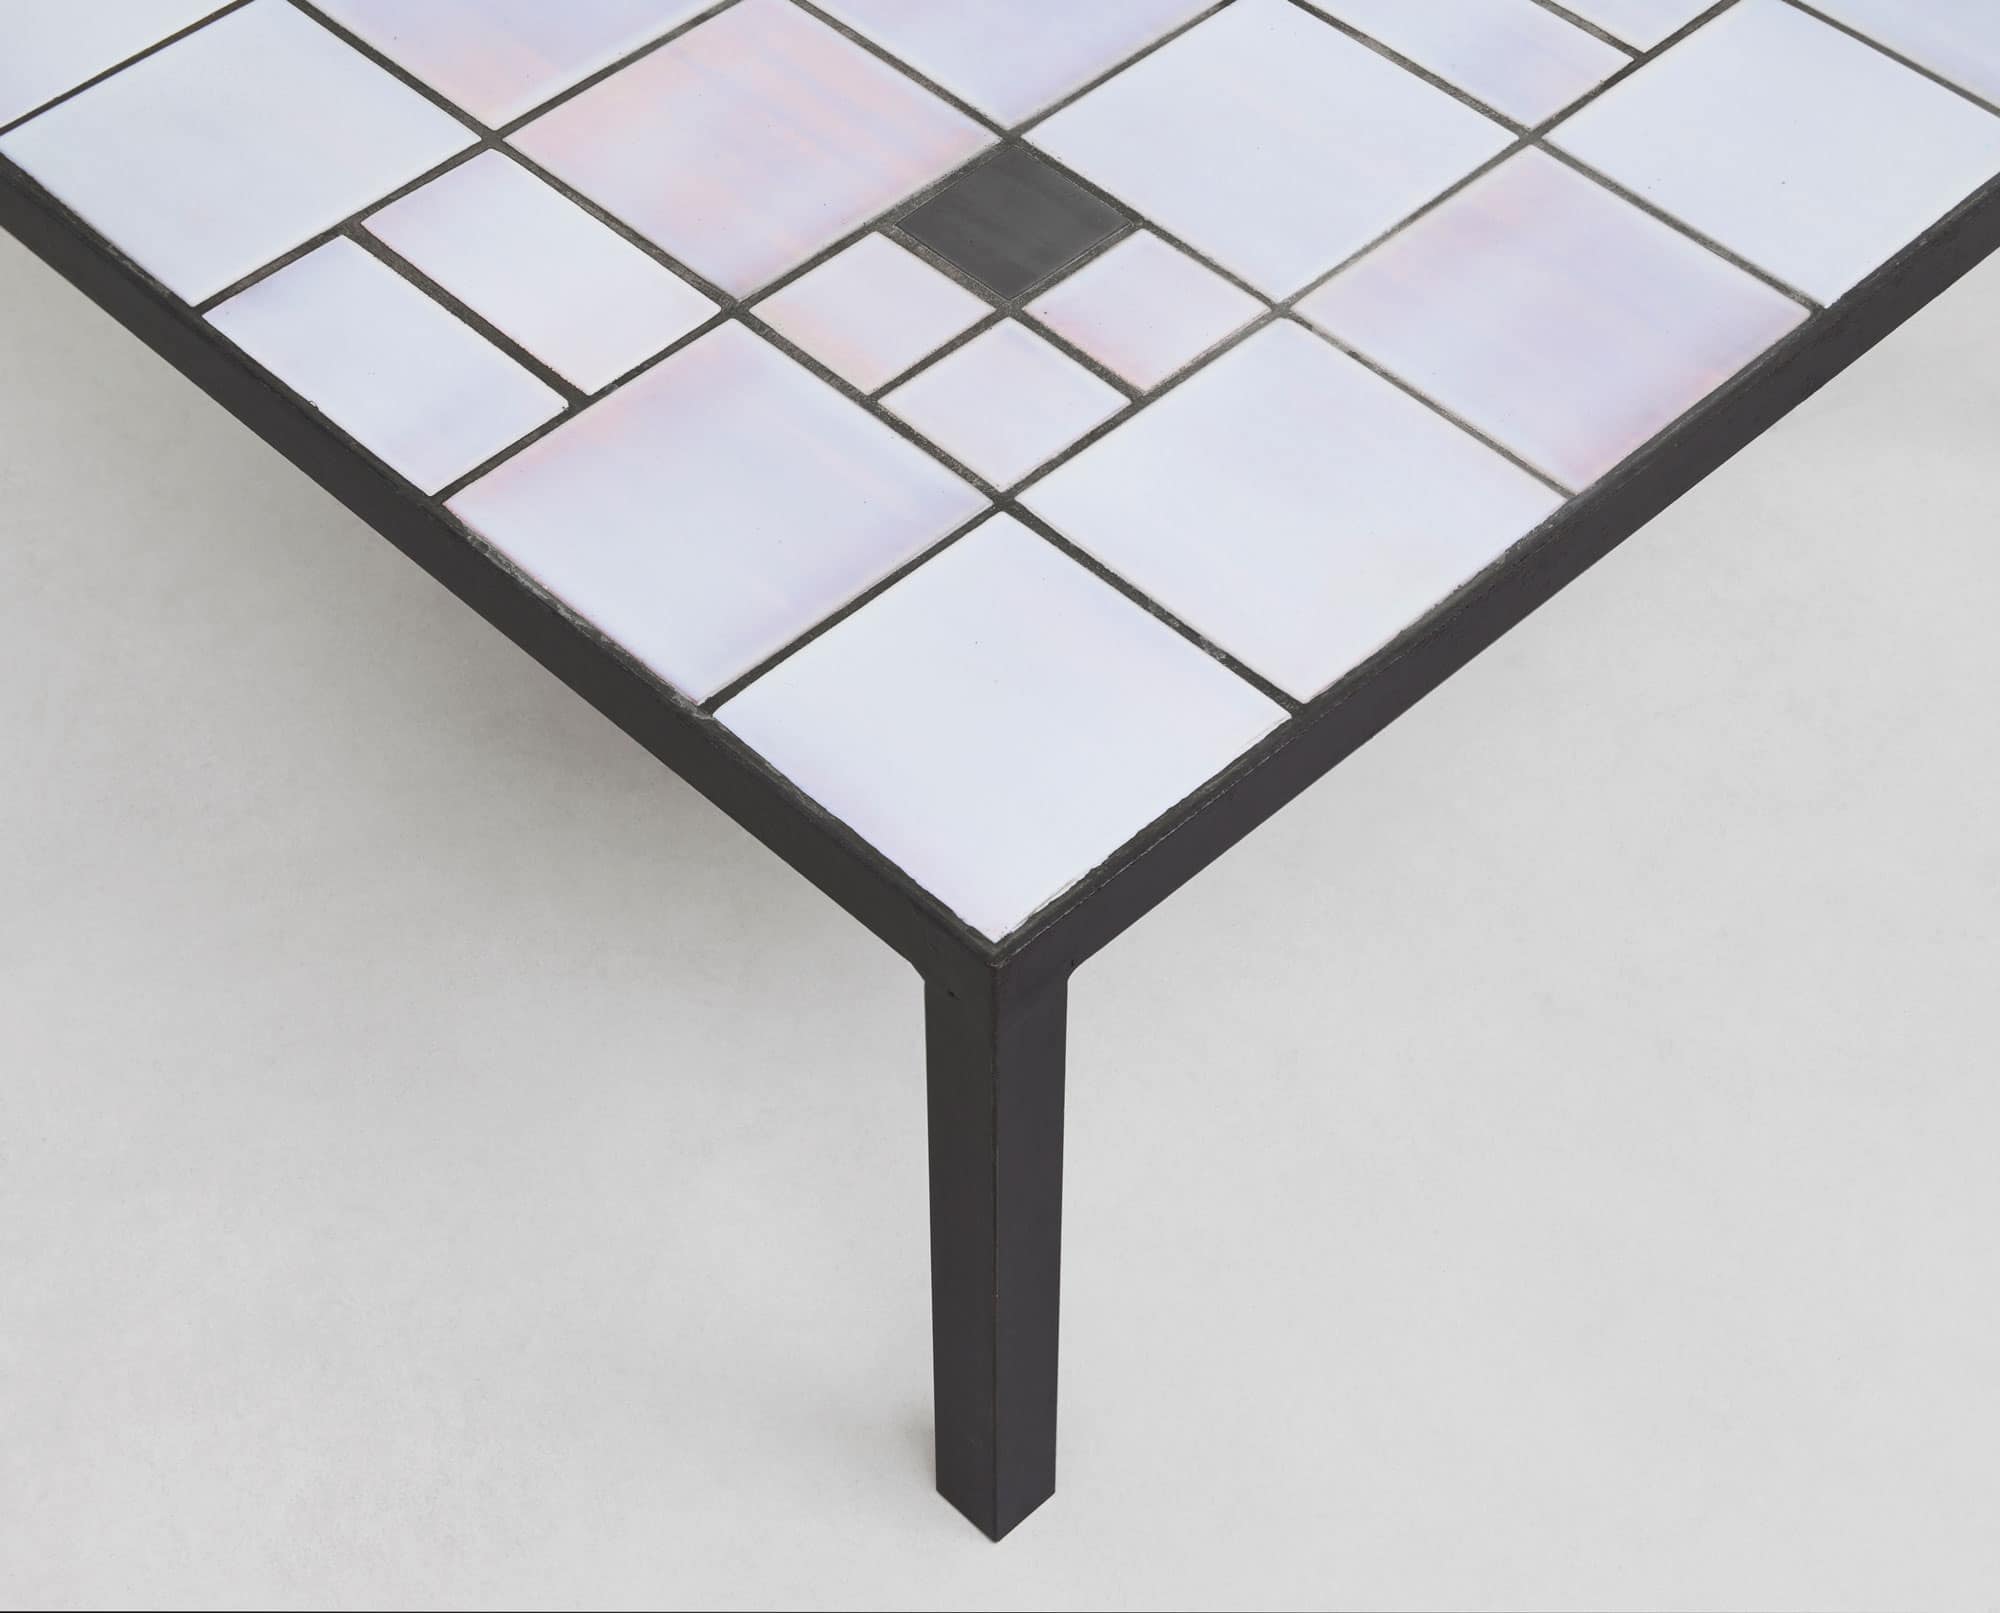 Georges Jouve, Coffee table, vue 01